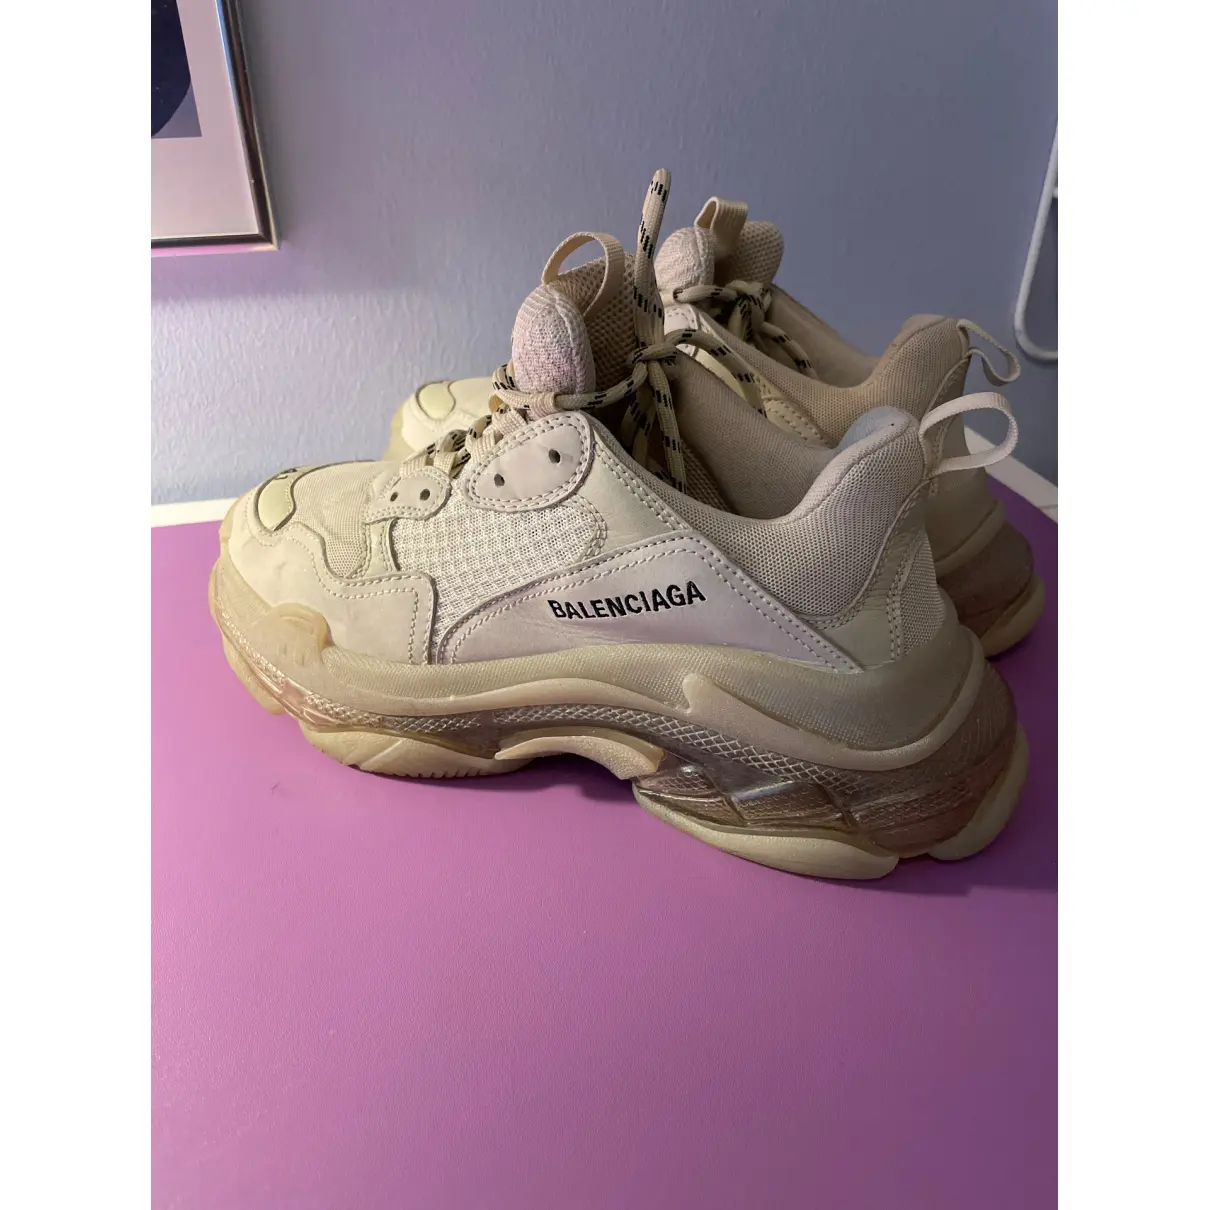 Buy Balenciaga Triple S leather low trainers online